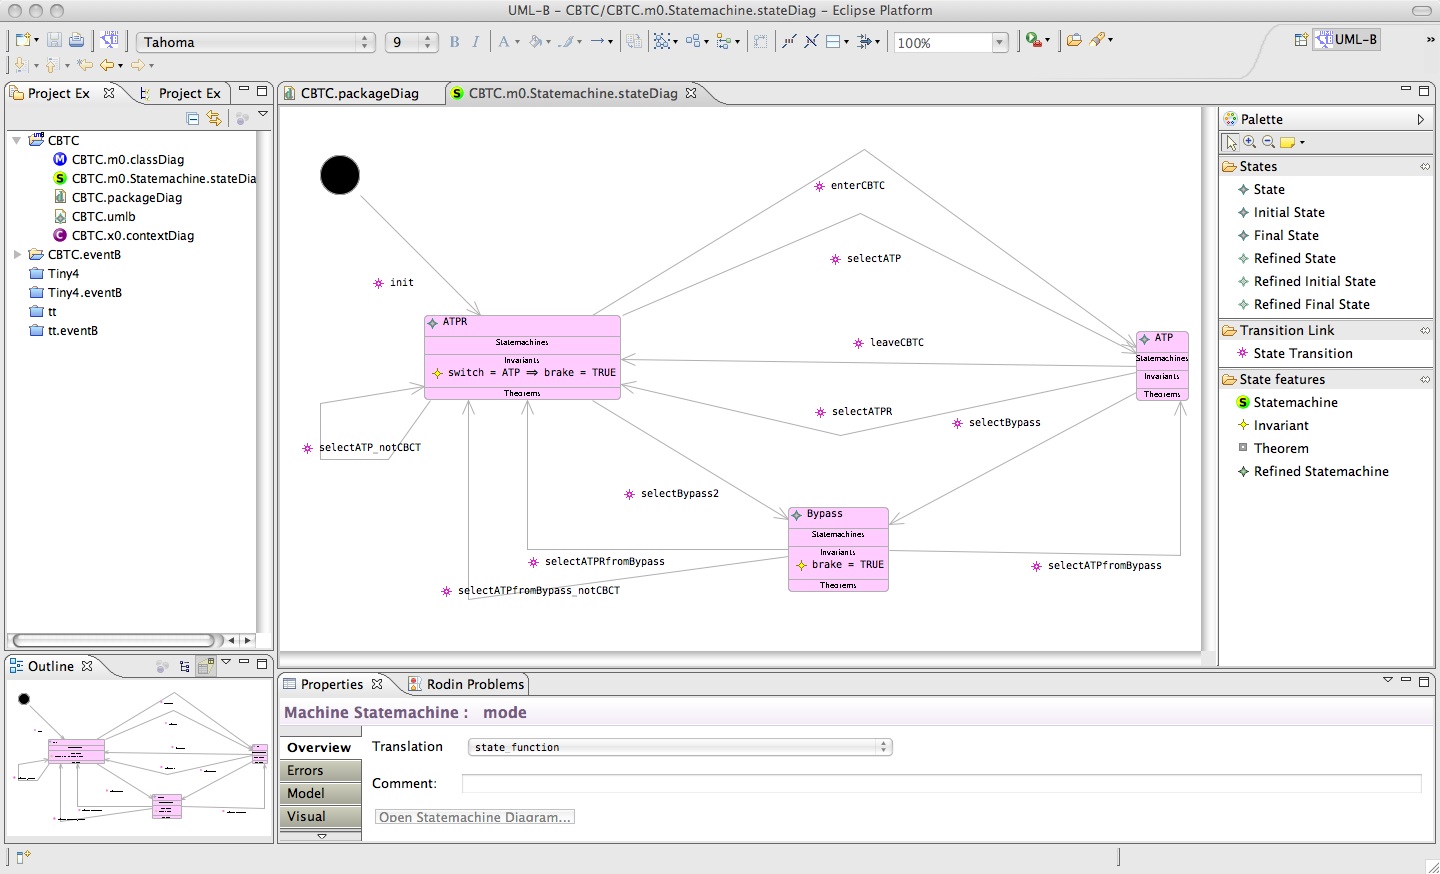 UML-B perspective with state machine diagram